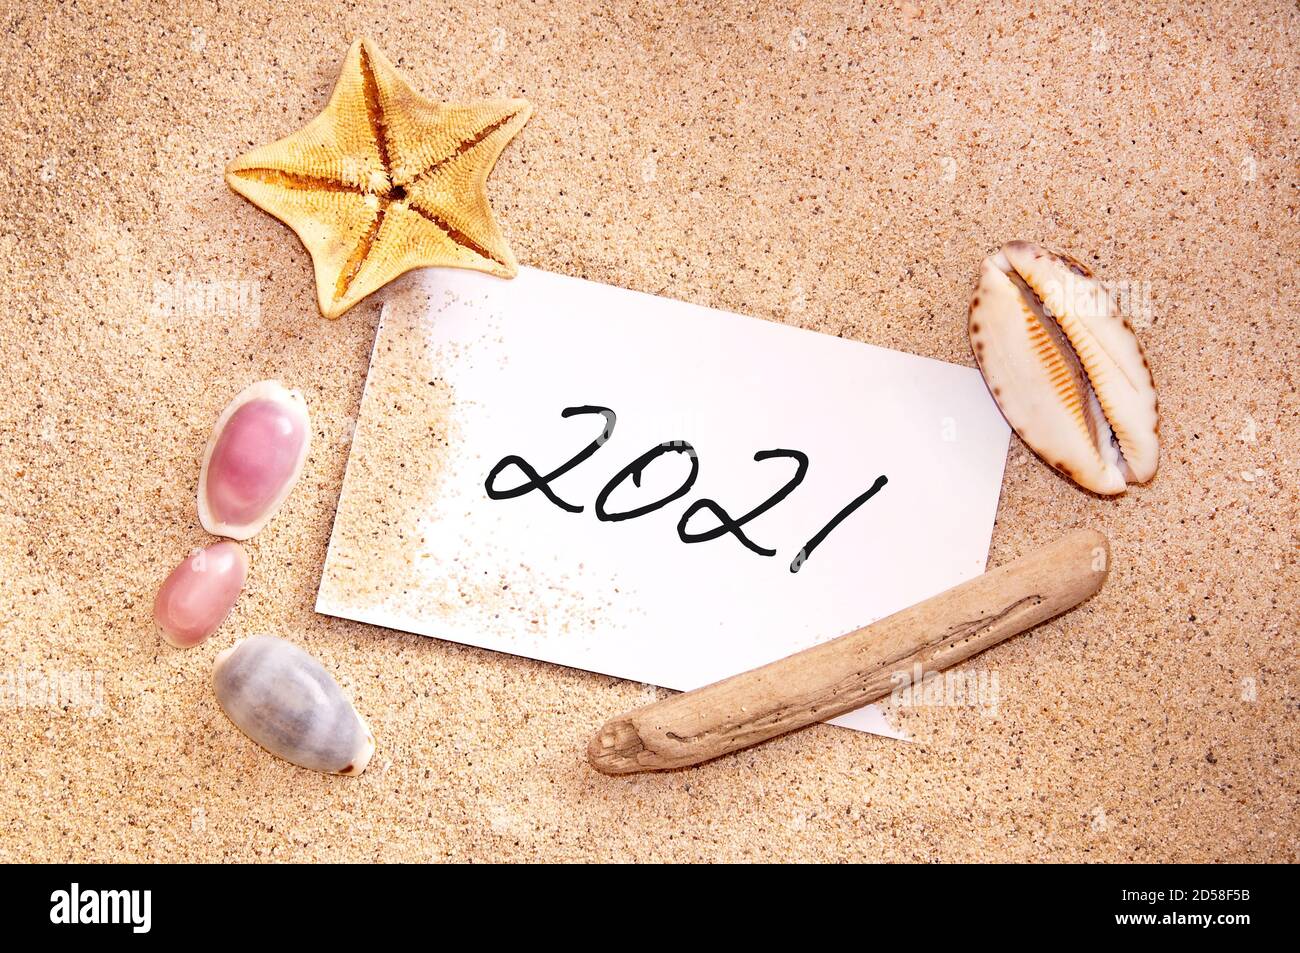 2021 written on a note in the sand of a beach with seashells, tropical vacations, new year holiday card Stock Photo